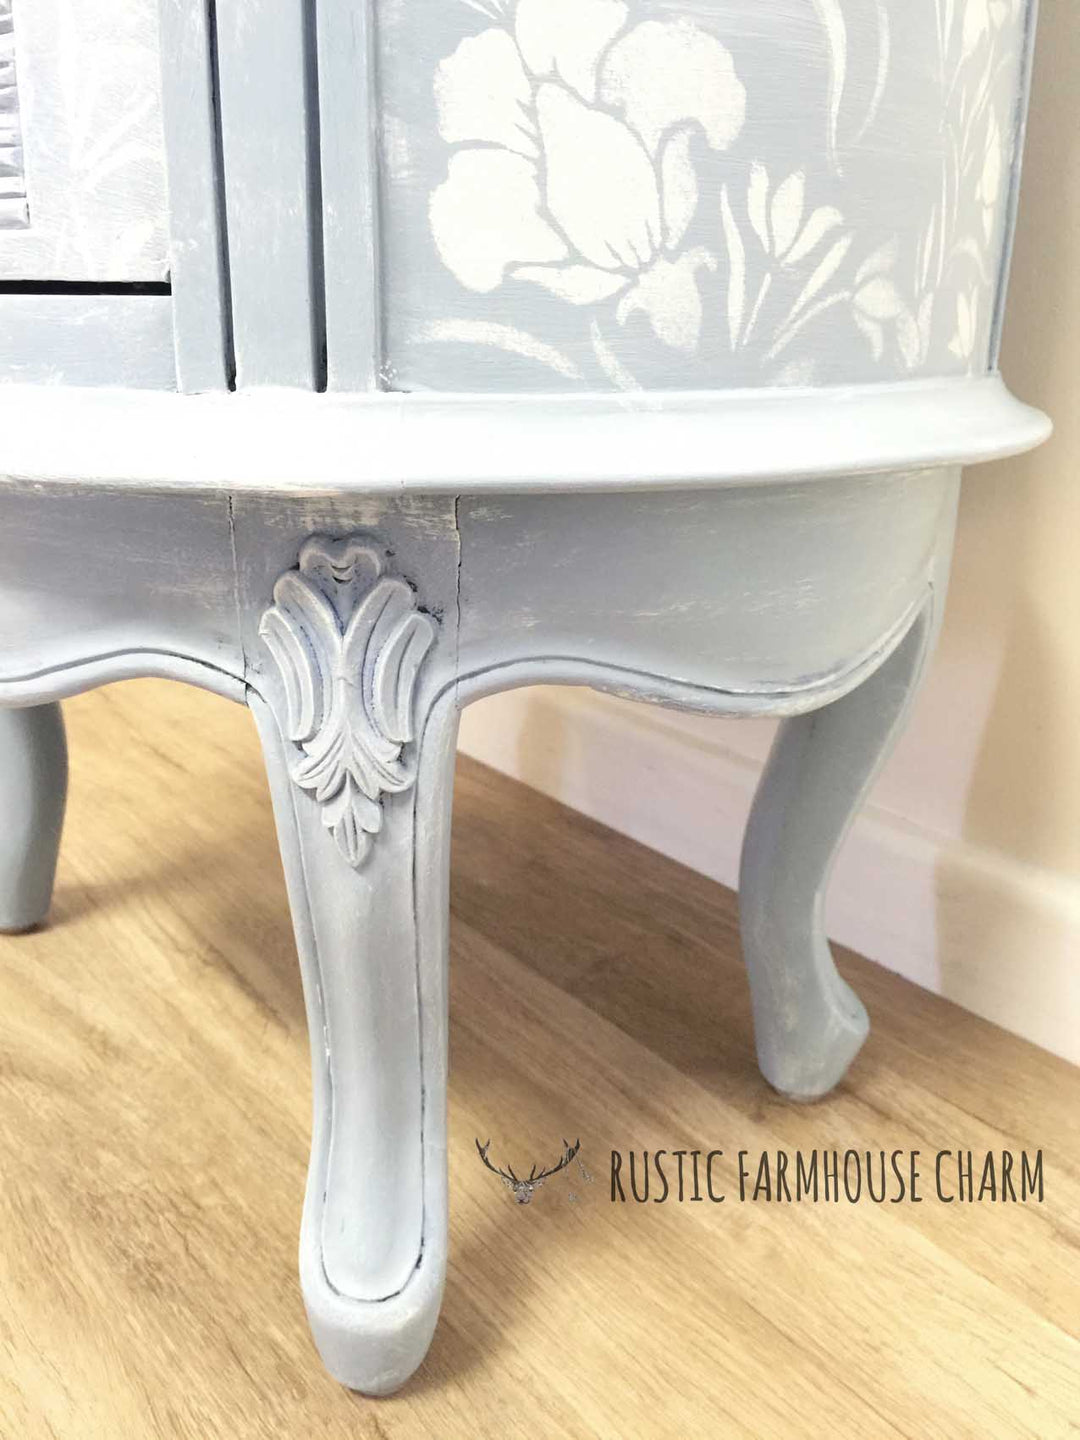 Floral Carved Indian Side Table with Drawers - Rustic Farmhouse Charm